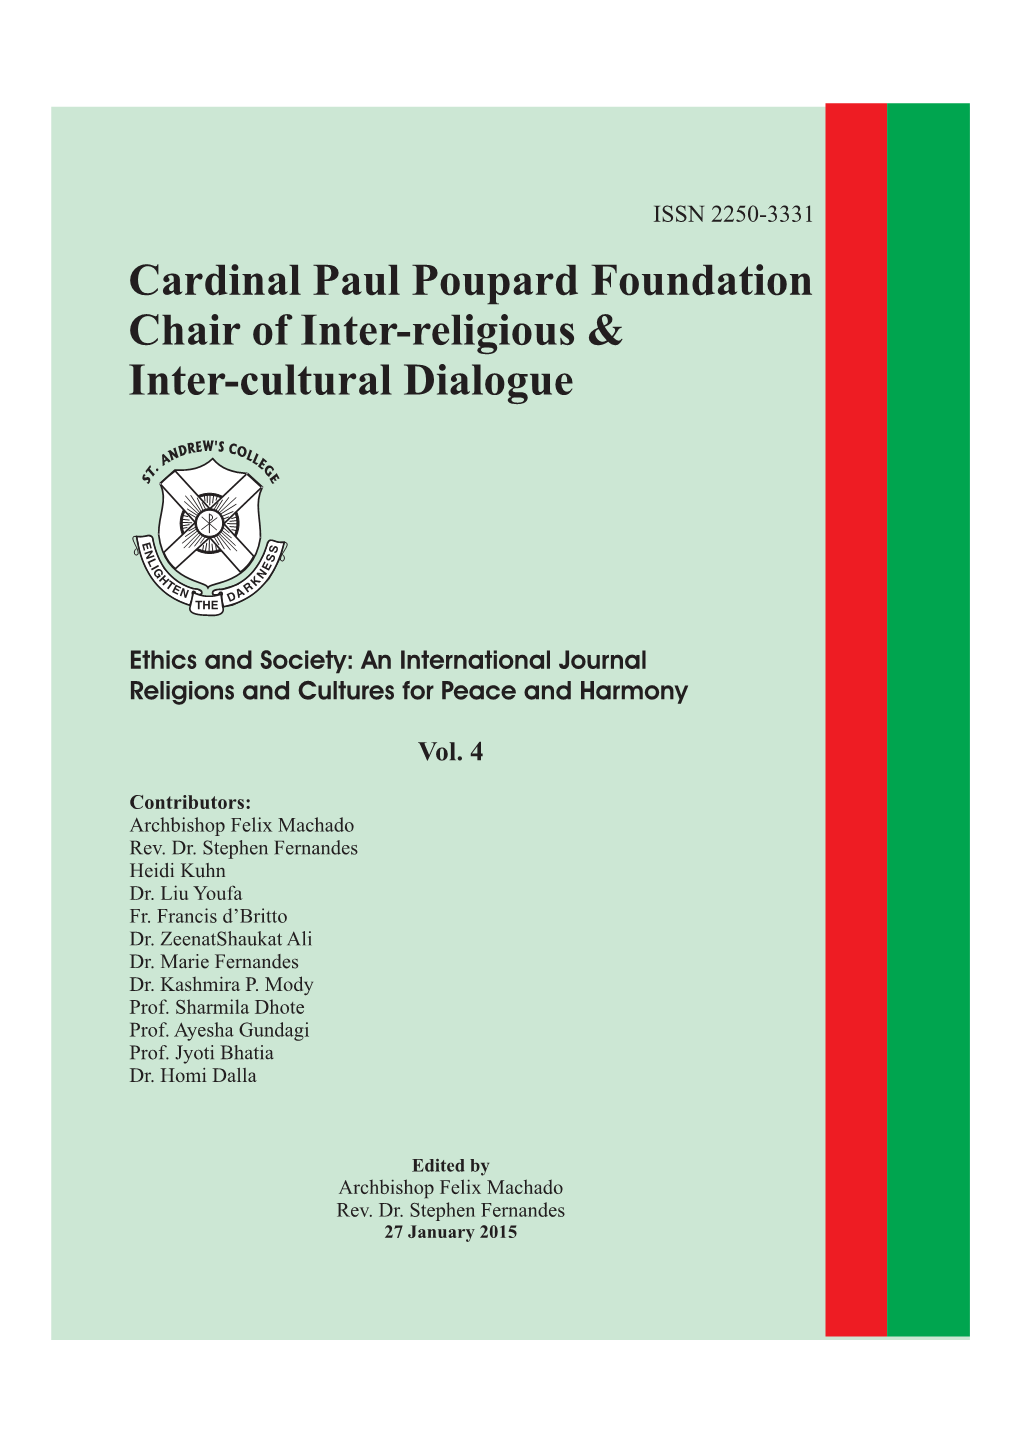 Cardinal Paul Poupard Foundation Chair of Inter-Religious & Inter